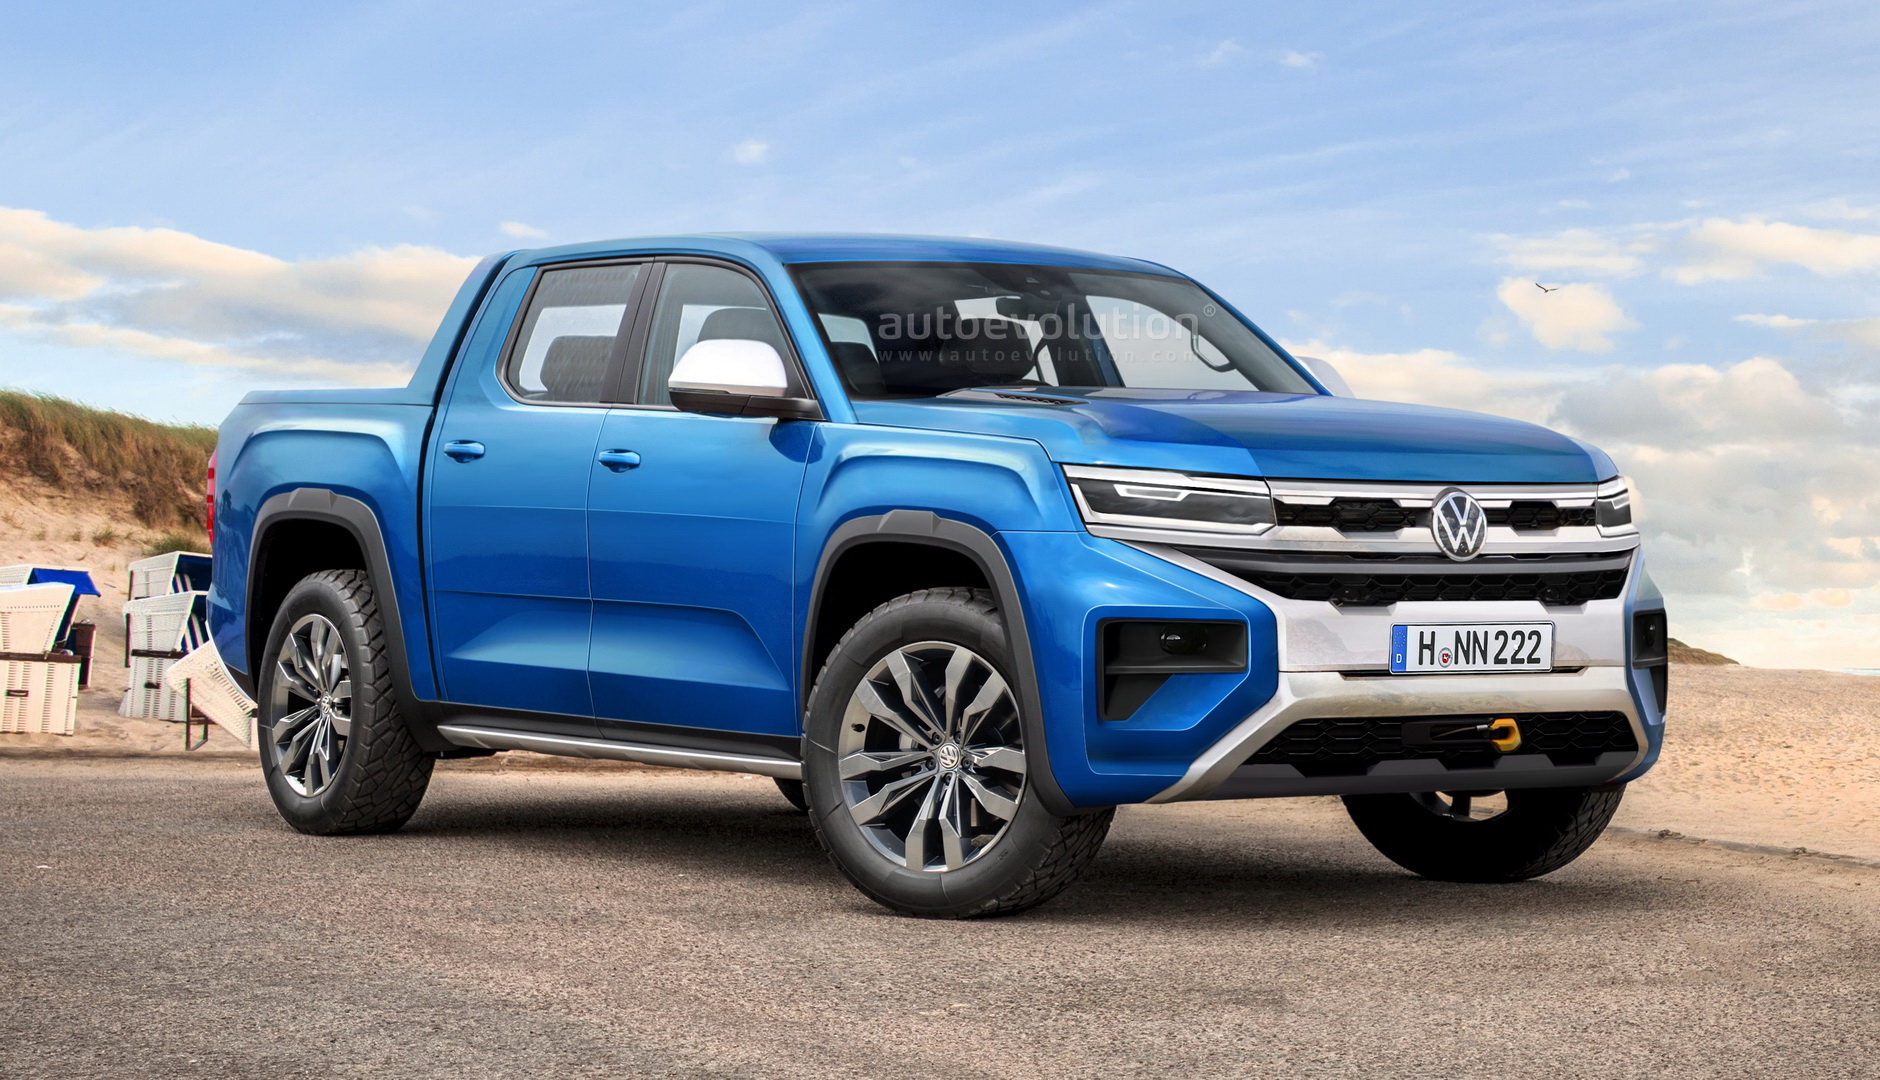 https://s1.cdn.autoevolution.com/images/news/2023-vw-amarok-could-end-up-being-one-seriously-cool-mid-size-pickup-truck-and-heres-why-168201_1.jpg